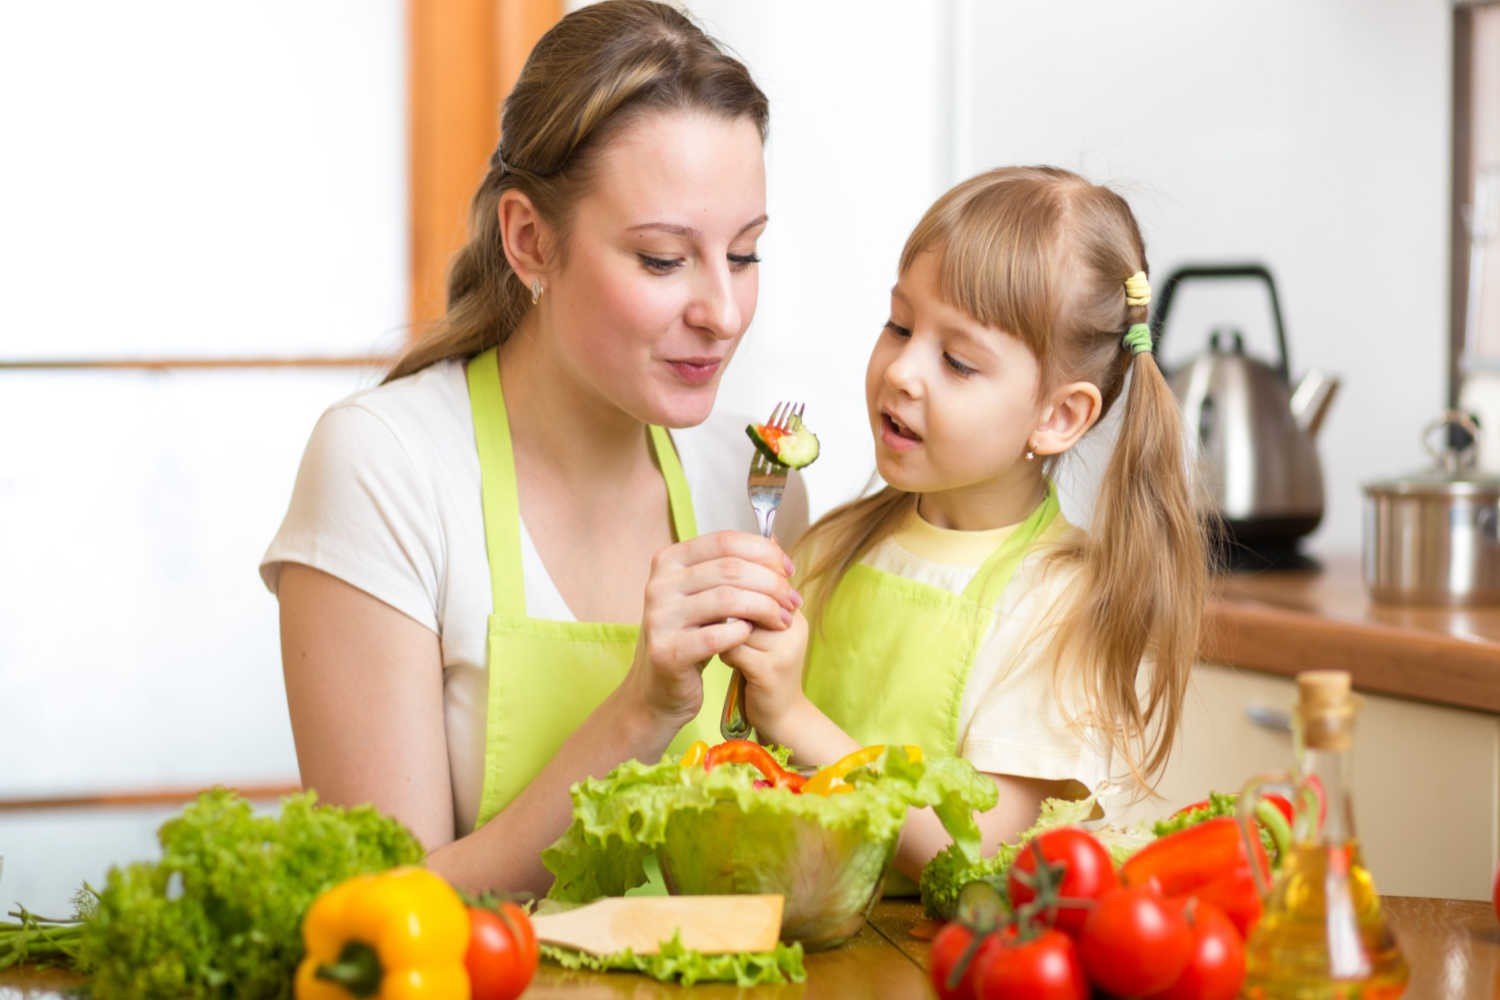 Top 5 Tips For Mothers to Help Their Child Eat Their Fruits & Vegetables